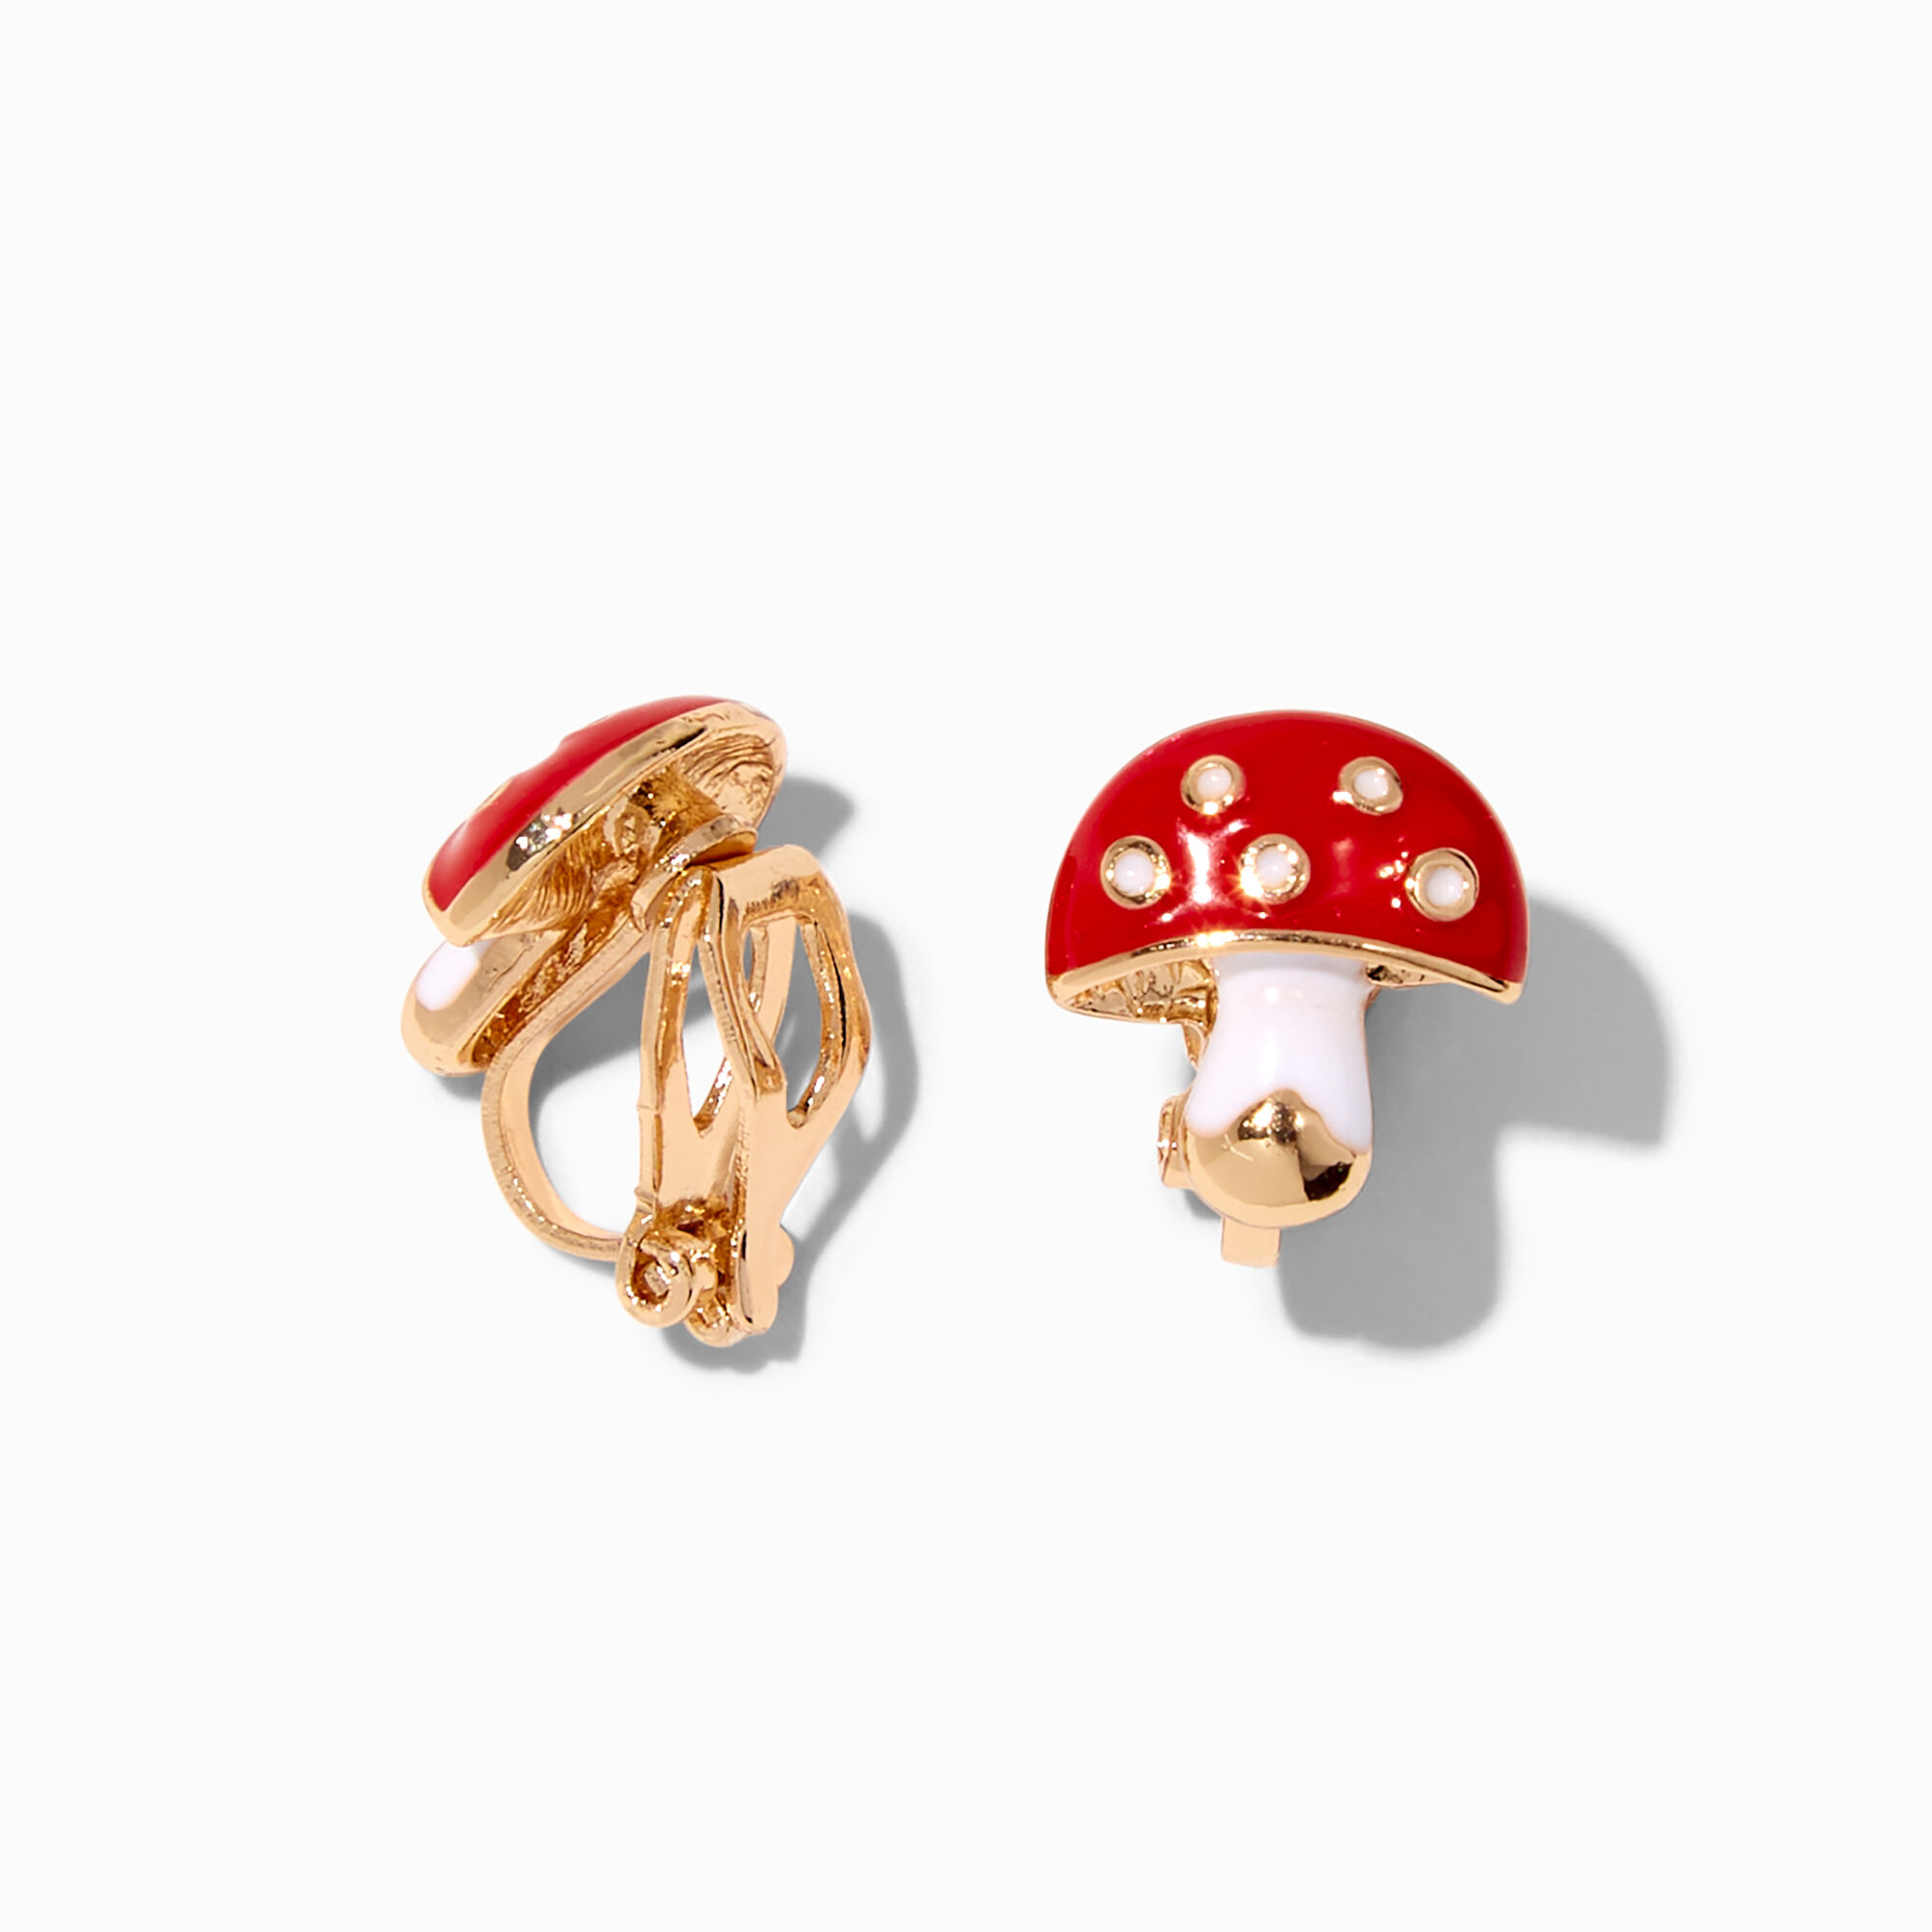 View Claires Mushroom ClipOn Stud Earrings Red information